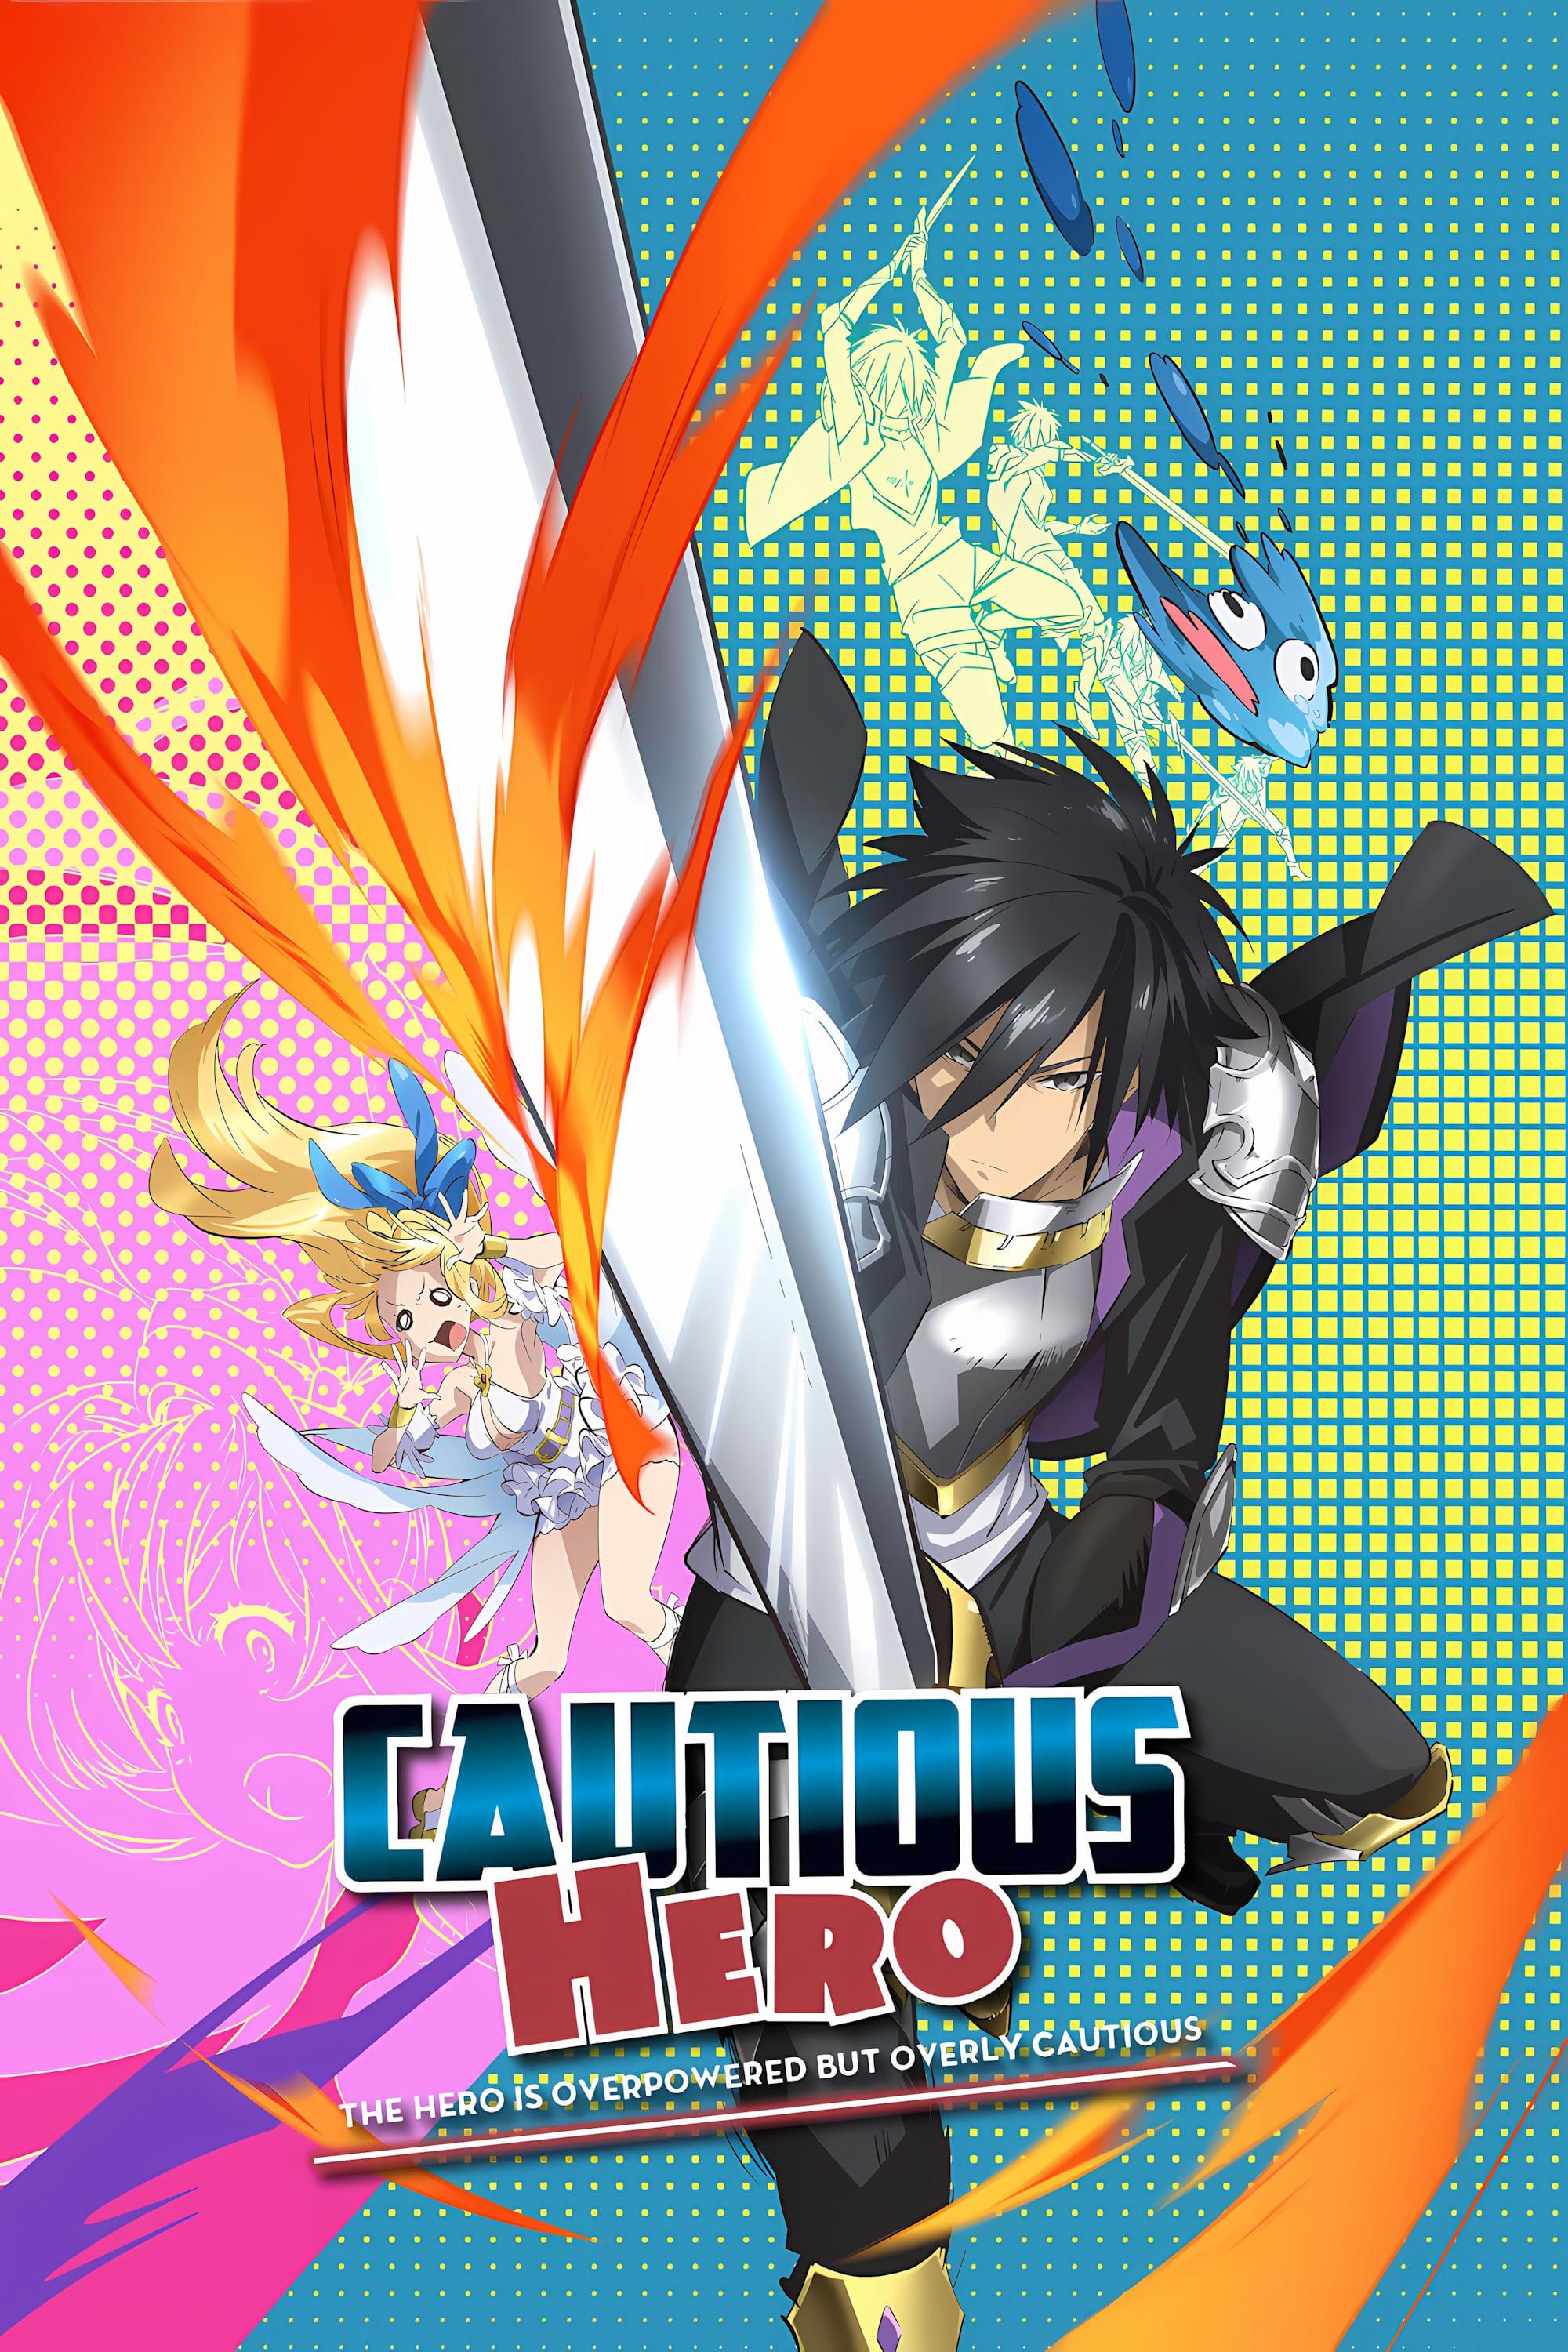 Cautious Hero: The Hero Is Overpowered but Overly Cautious poster